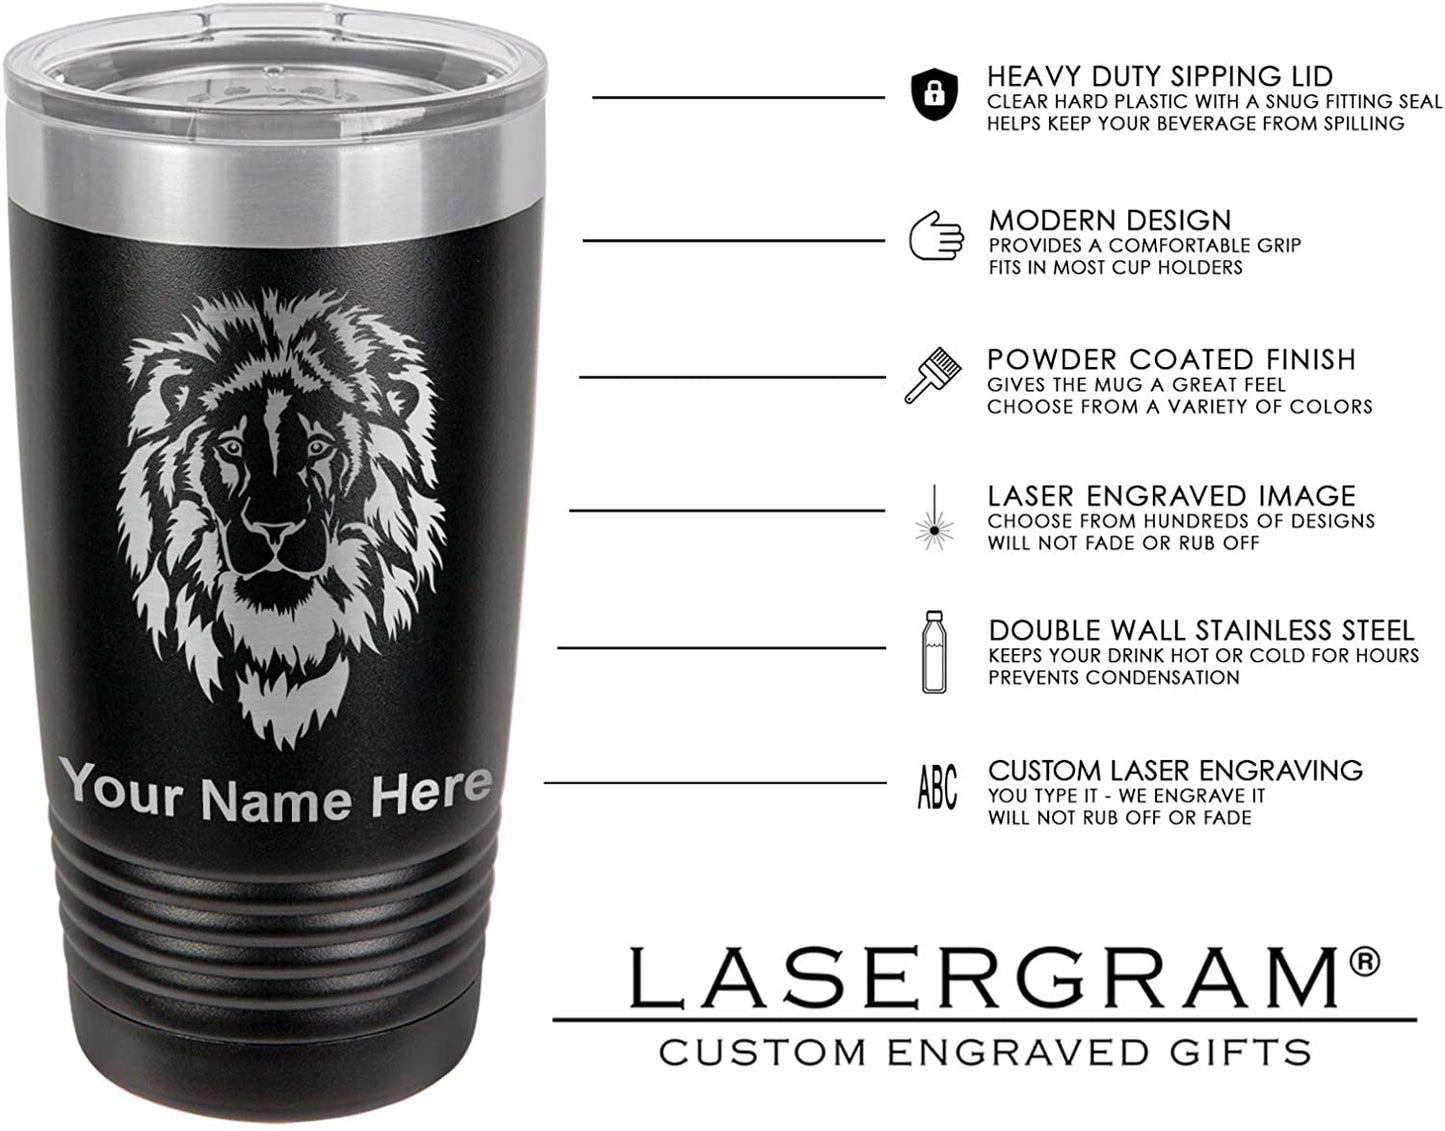 20oz Vacuum Insulated Tumbler Mug, World's Greatest Grandson, Personalized Engraving Included